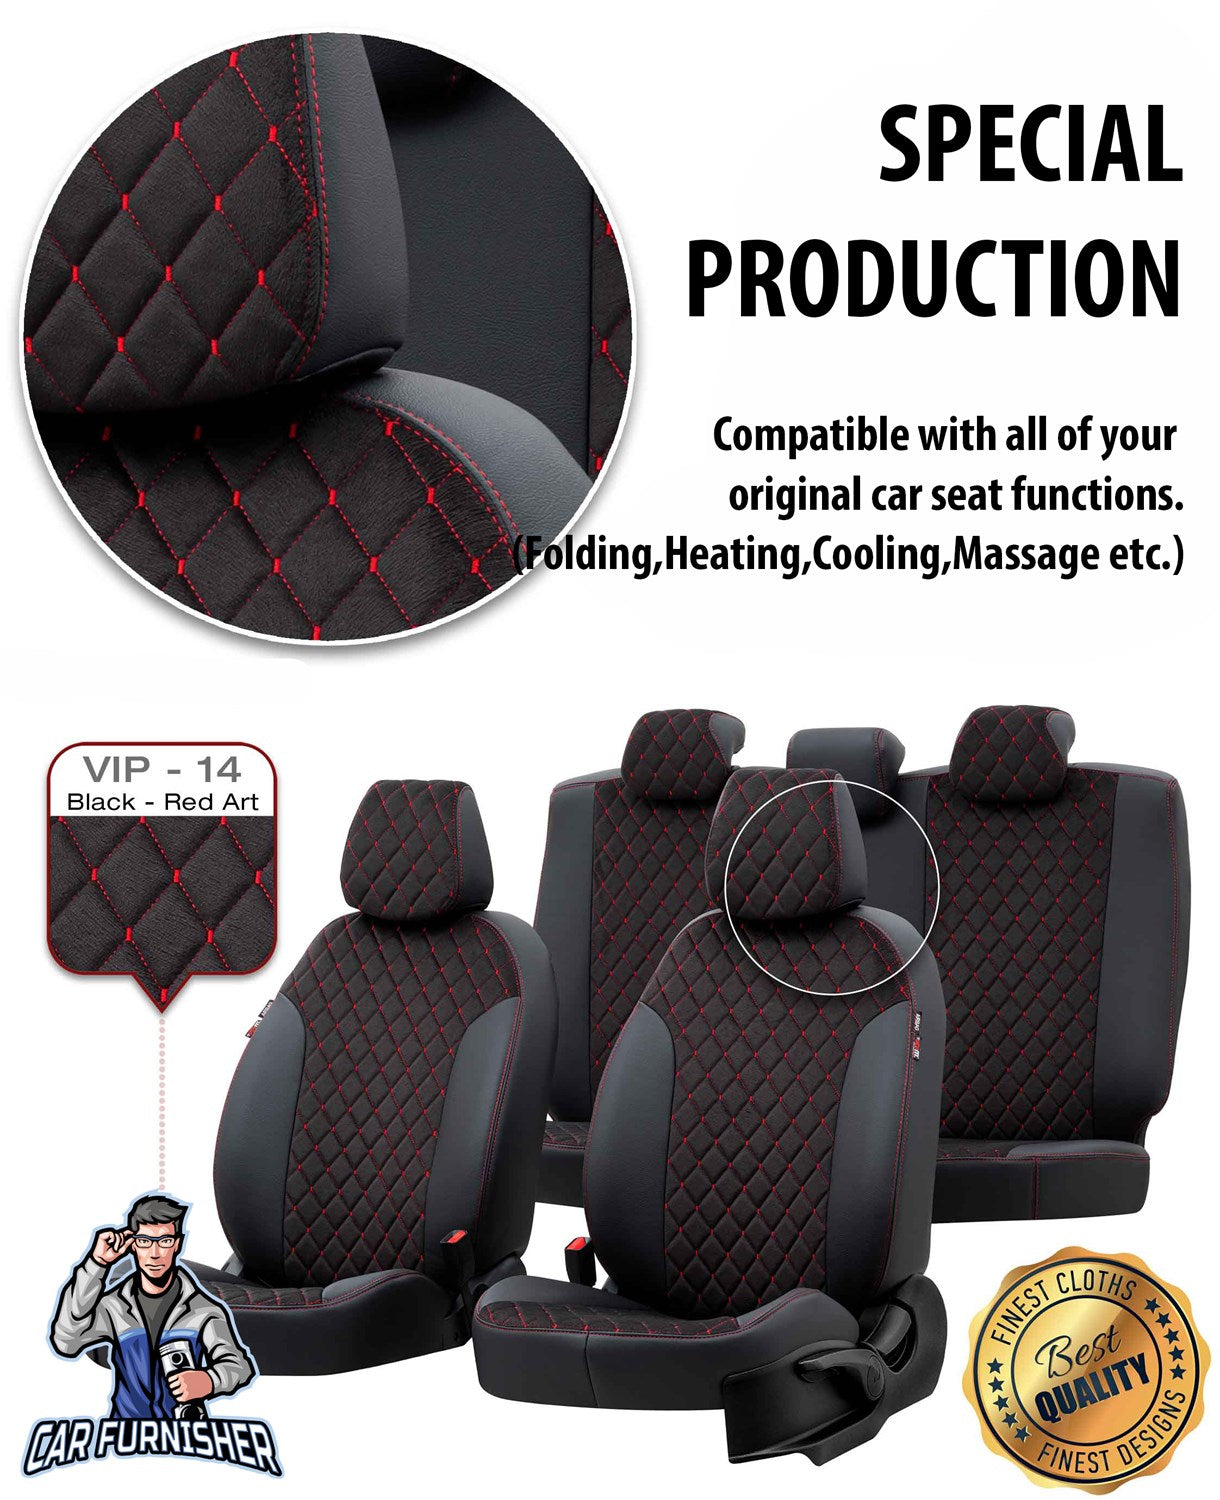 Isuzu N35 Seat Cover Madrid Foal Feather Design Smoked Leather & Foal Feather